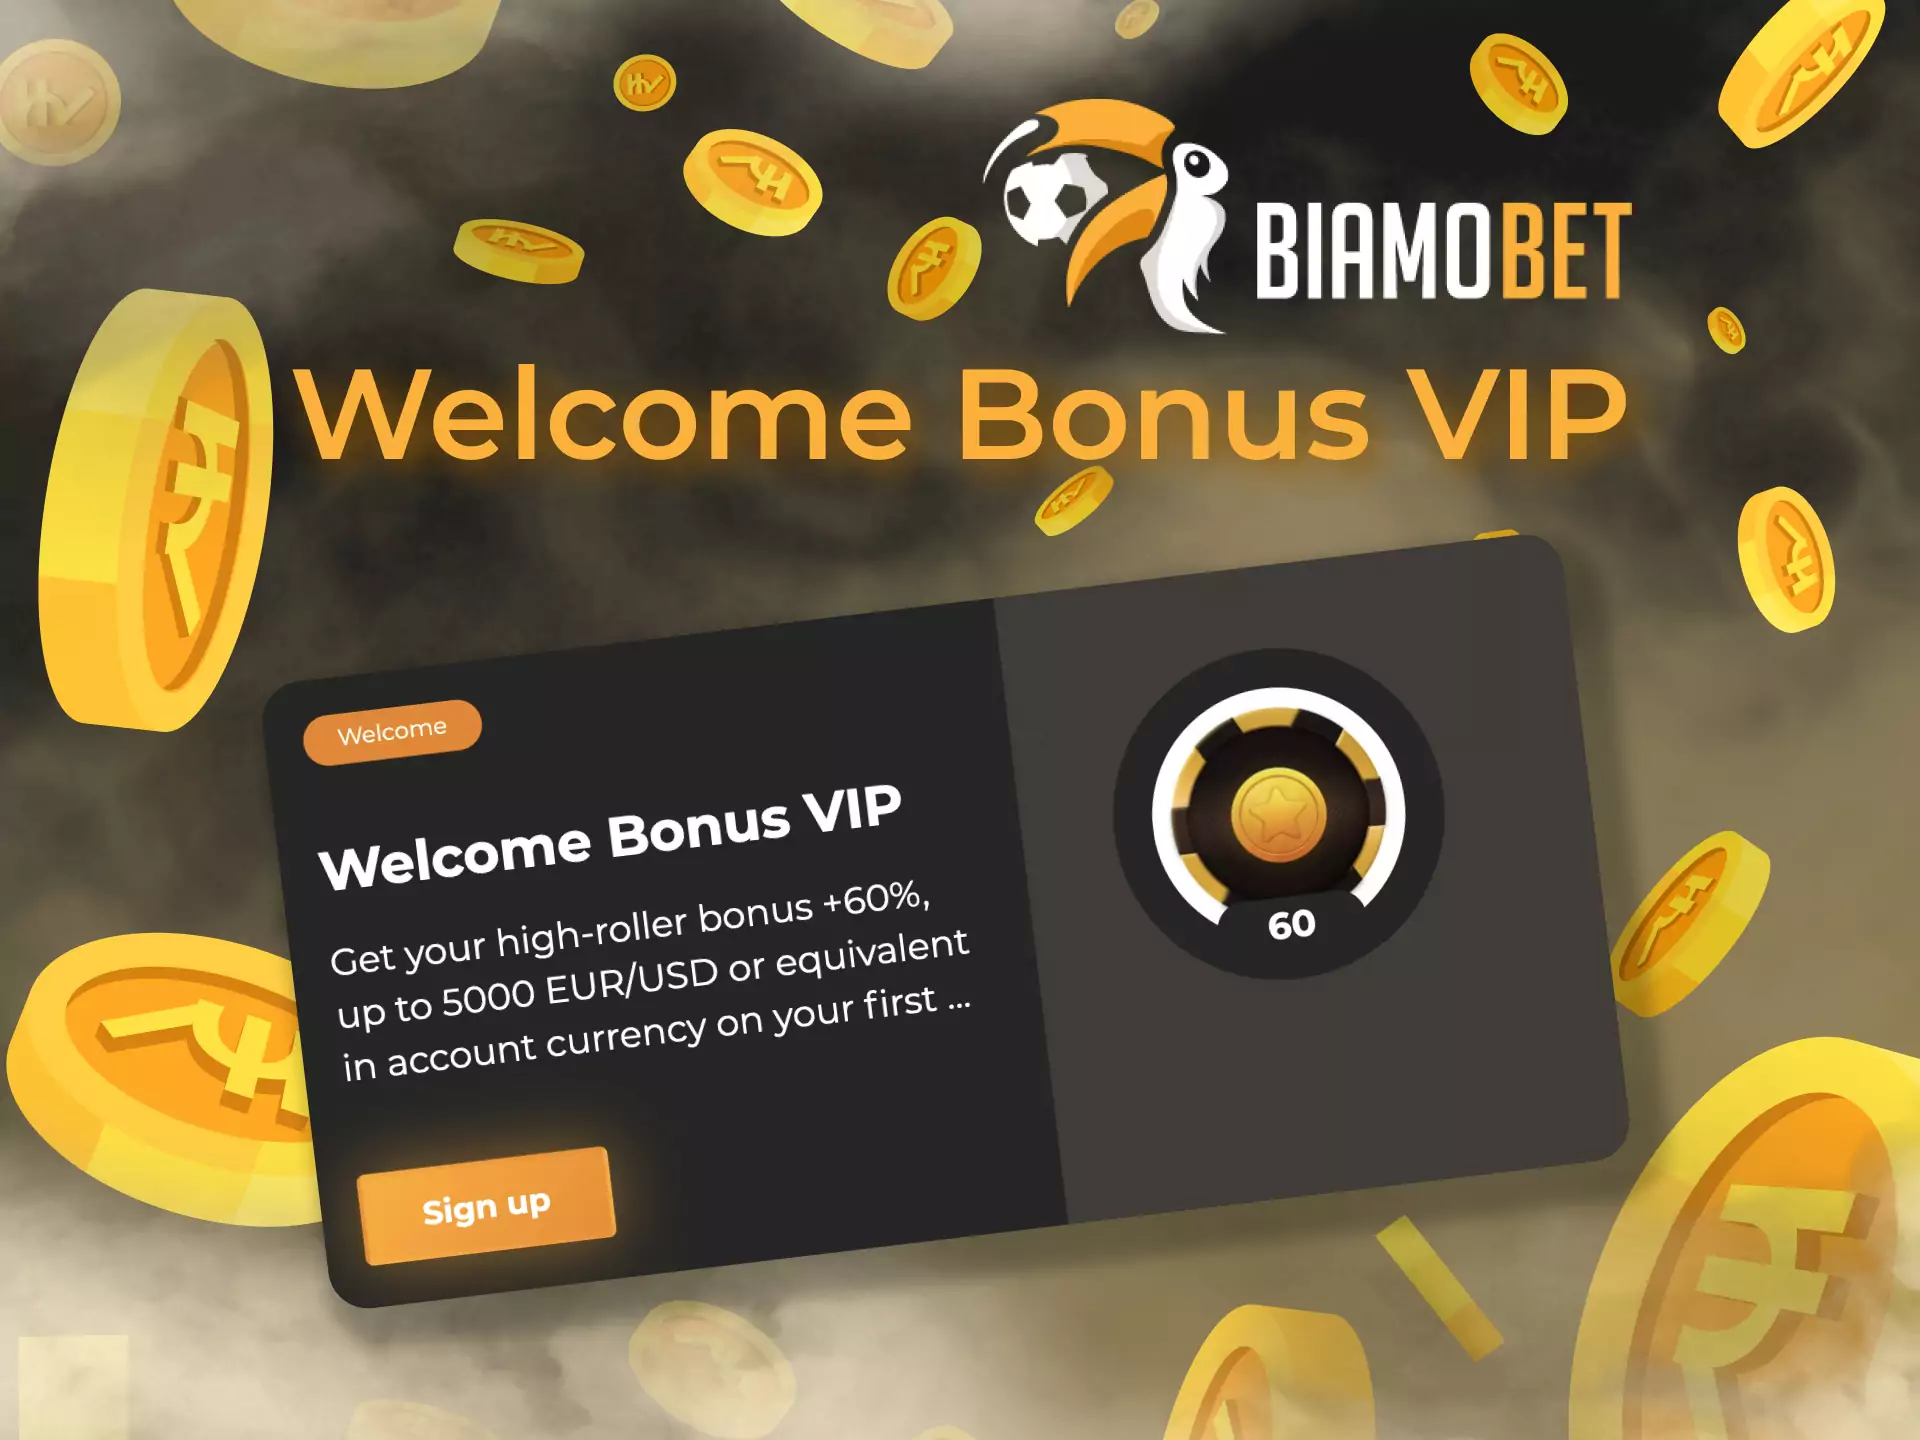 The regular users can joun the VIP program and get additional benefits from Biamobet.